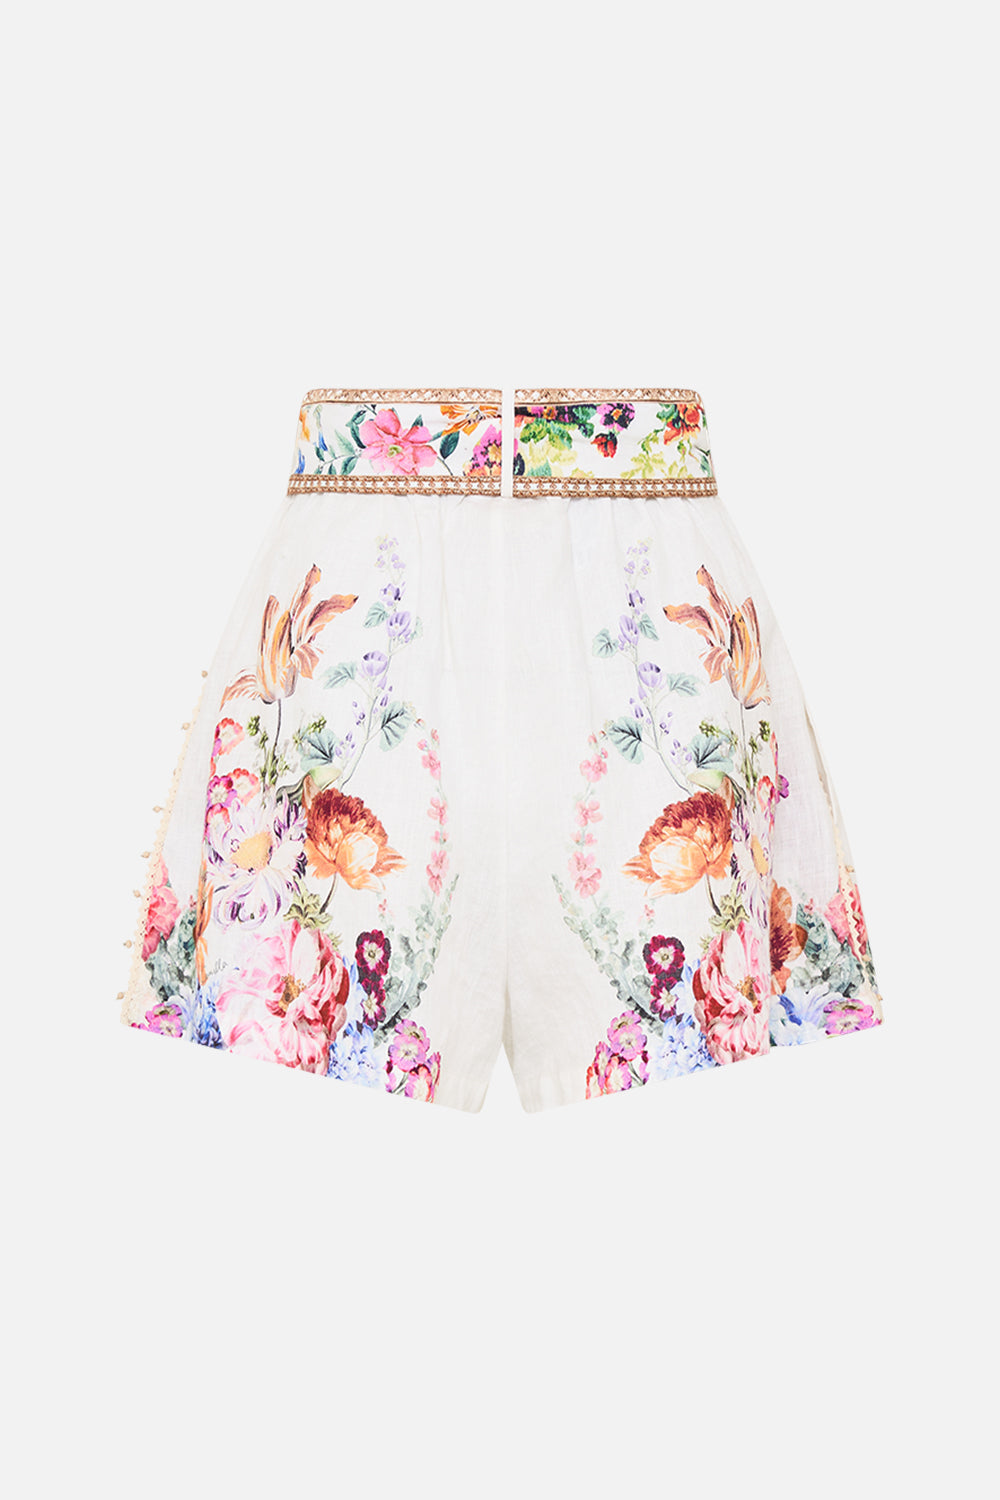 CAMILLA tuck front shorts in Plumes and Parterres print